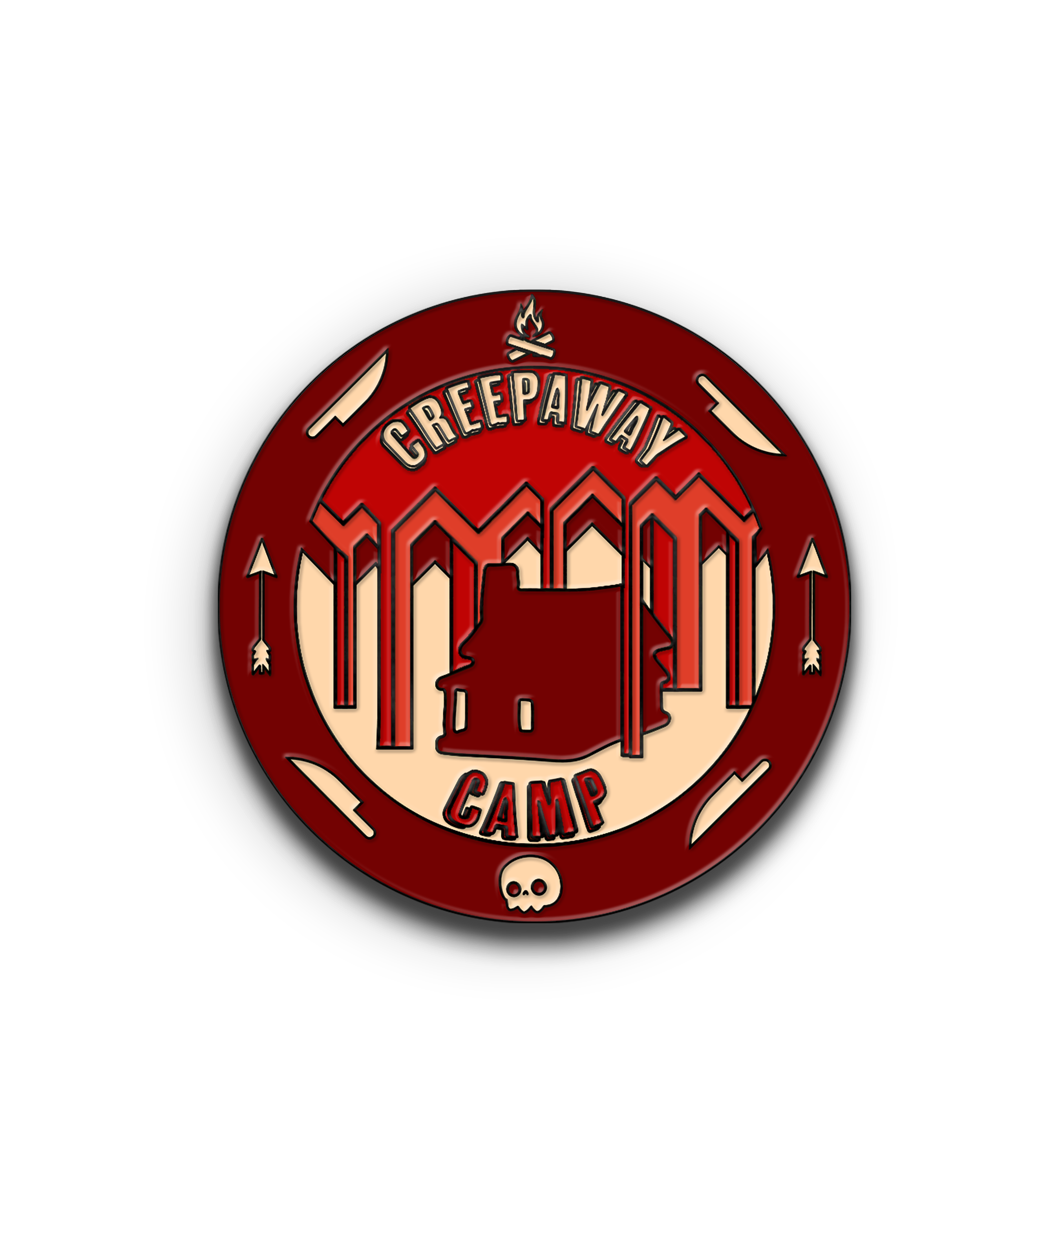 A circular pin with a dark red band goes around the outside with icons of a campfire, knives, arrows and a skull. Inside the circle is a small log cabin and text that reads 